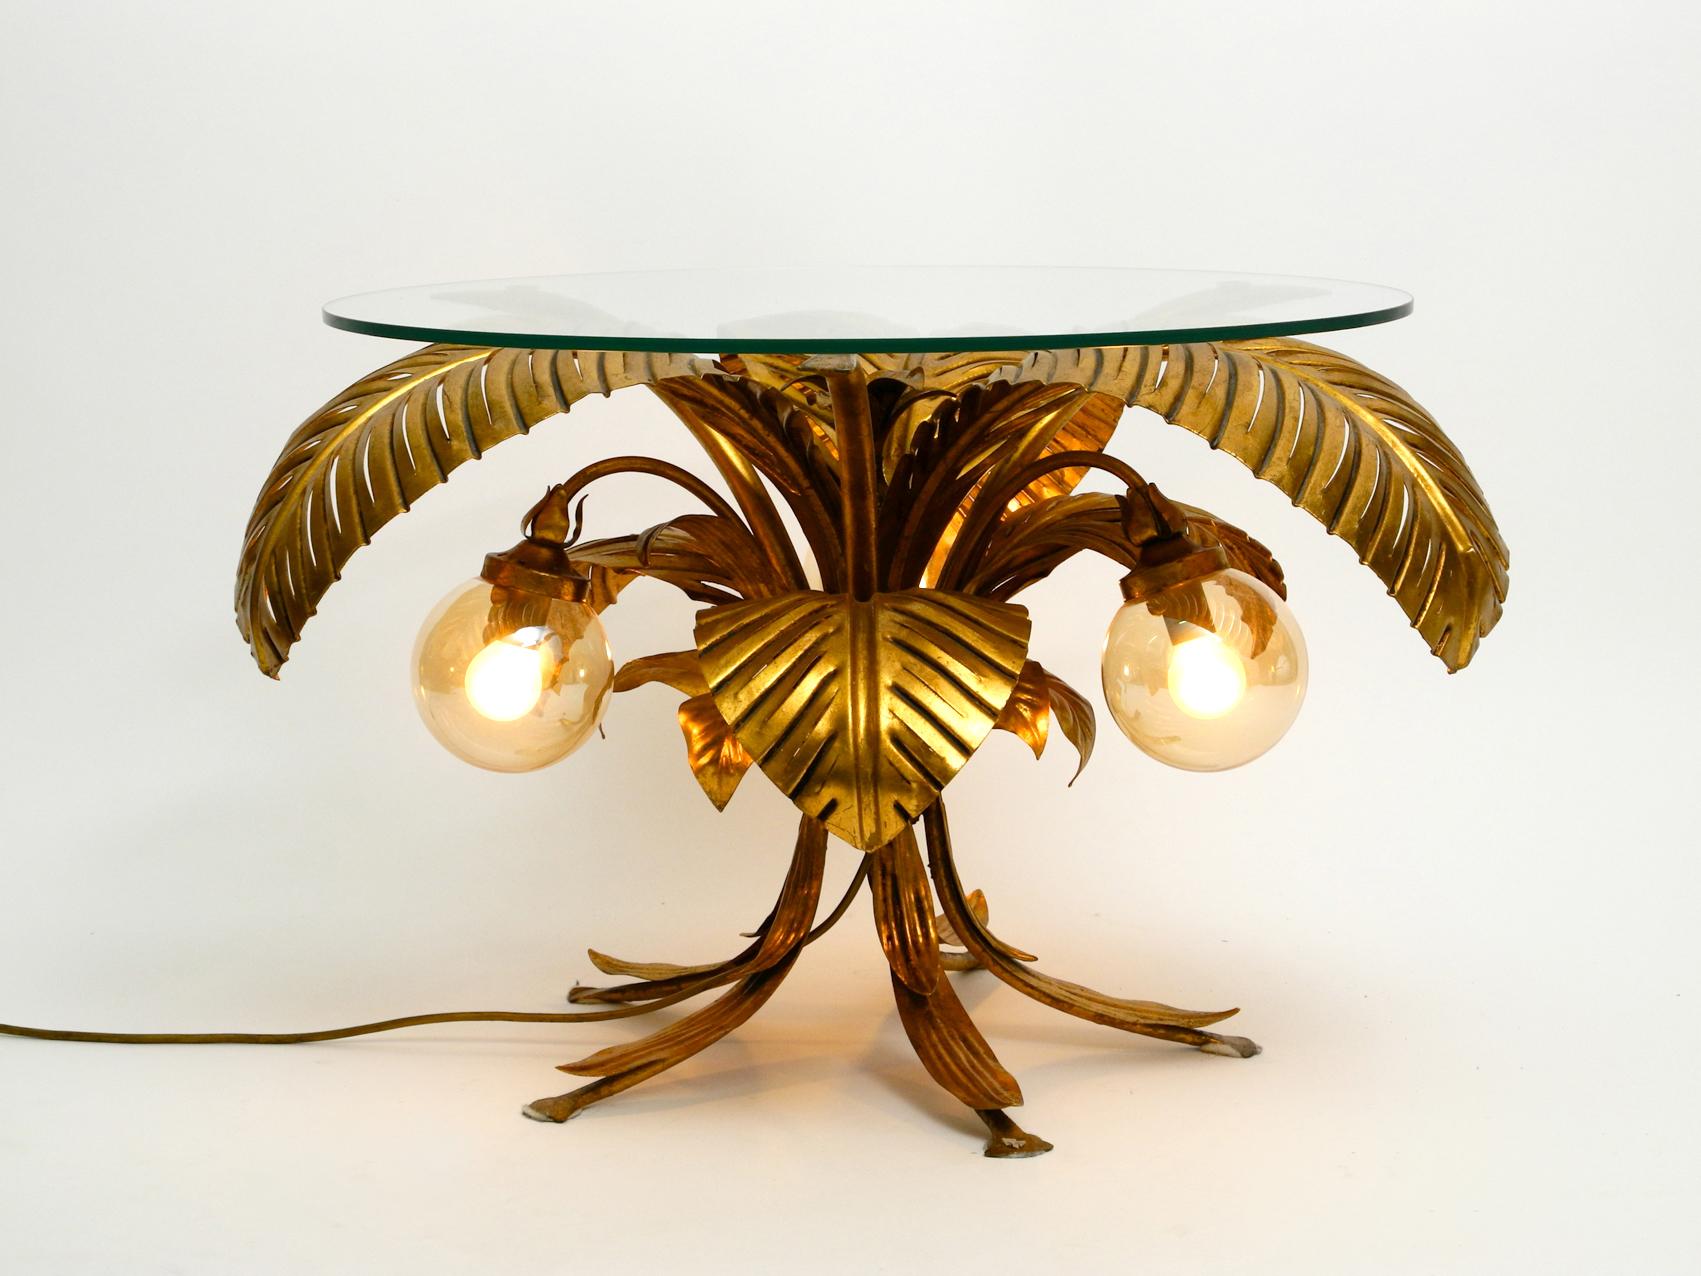 Very rare elegant illuminated 1980s Florentine table with original glass top.
Great unusual design with large leaves from an Italian production.
Completely made of metal, all gilded or elaborately painted in brass color.
Thick light tinted